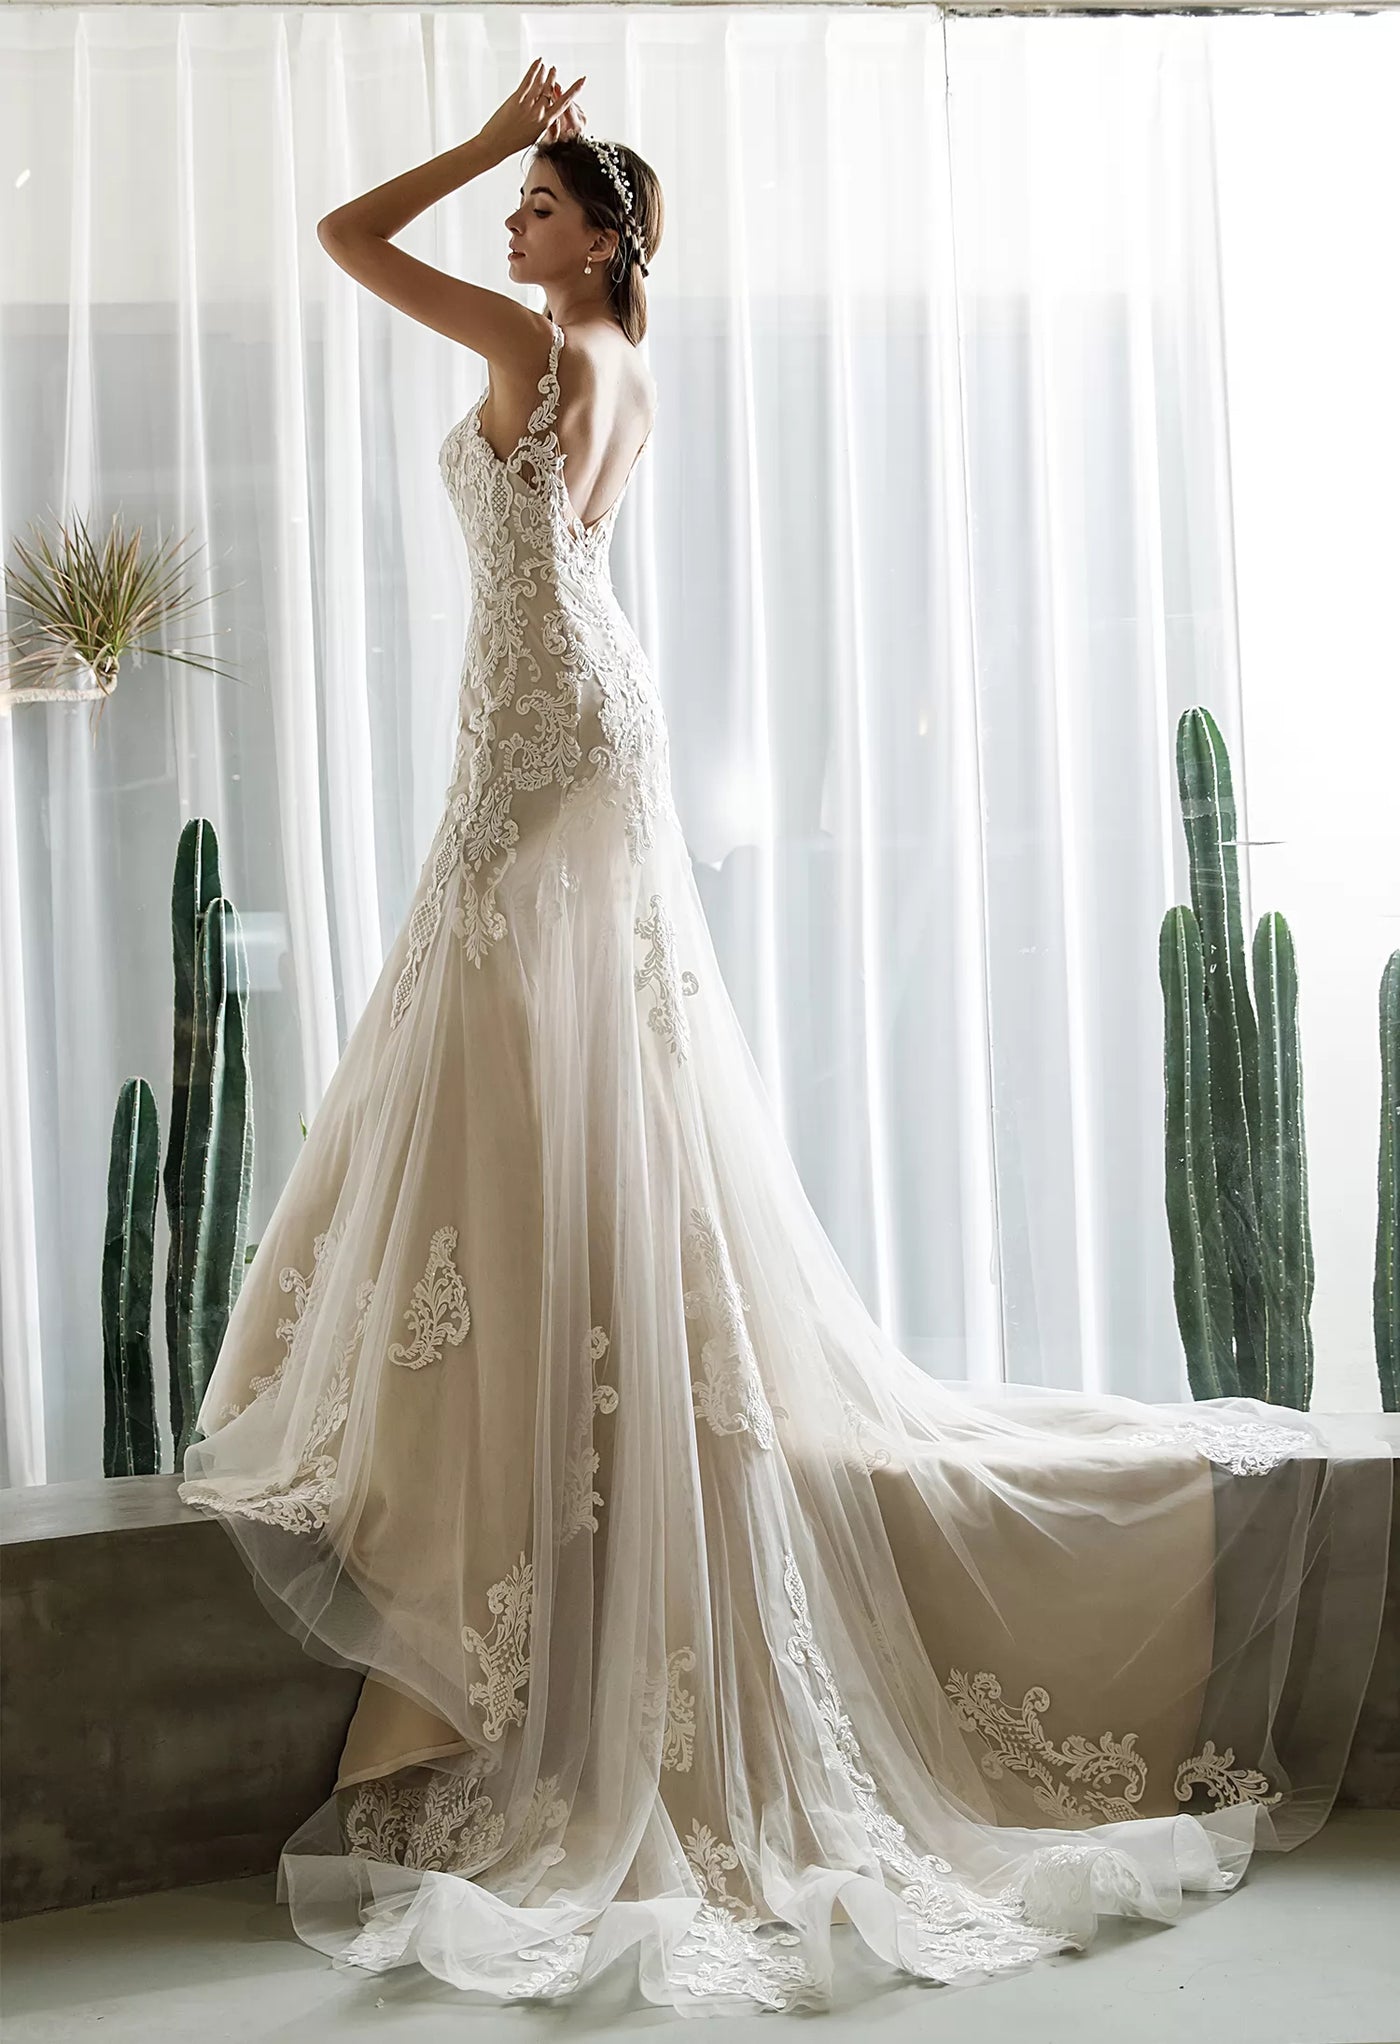 Lace Silhouette Mermaid Bridal Gown